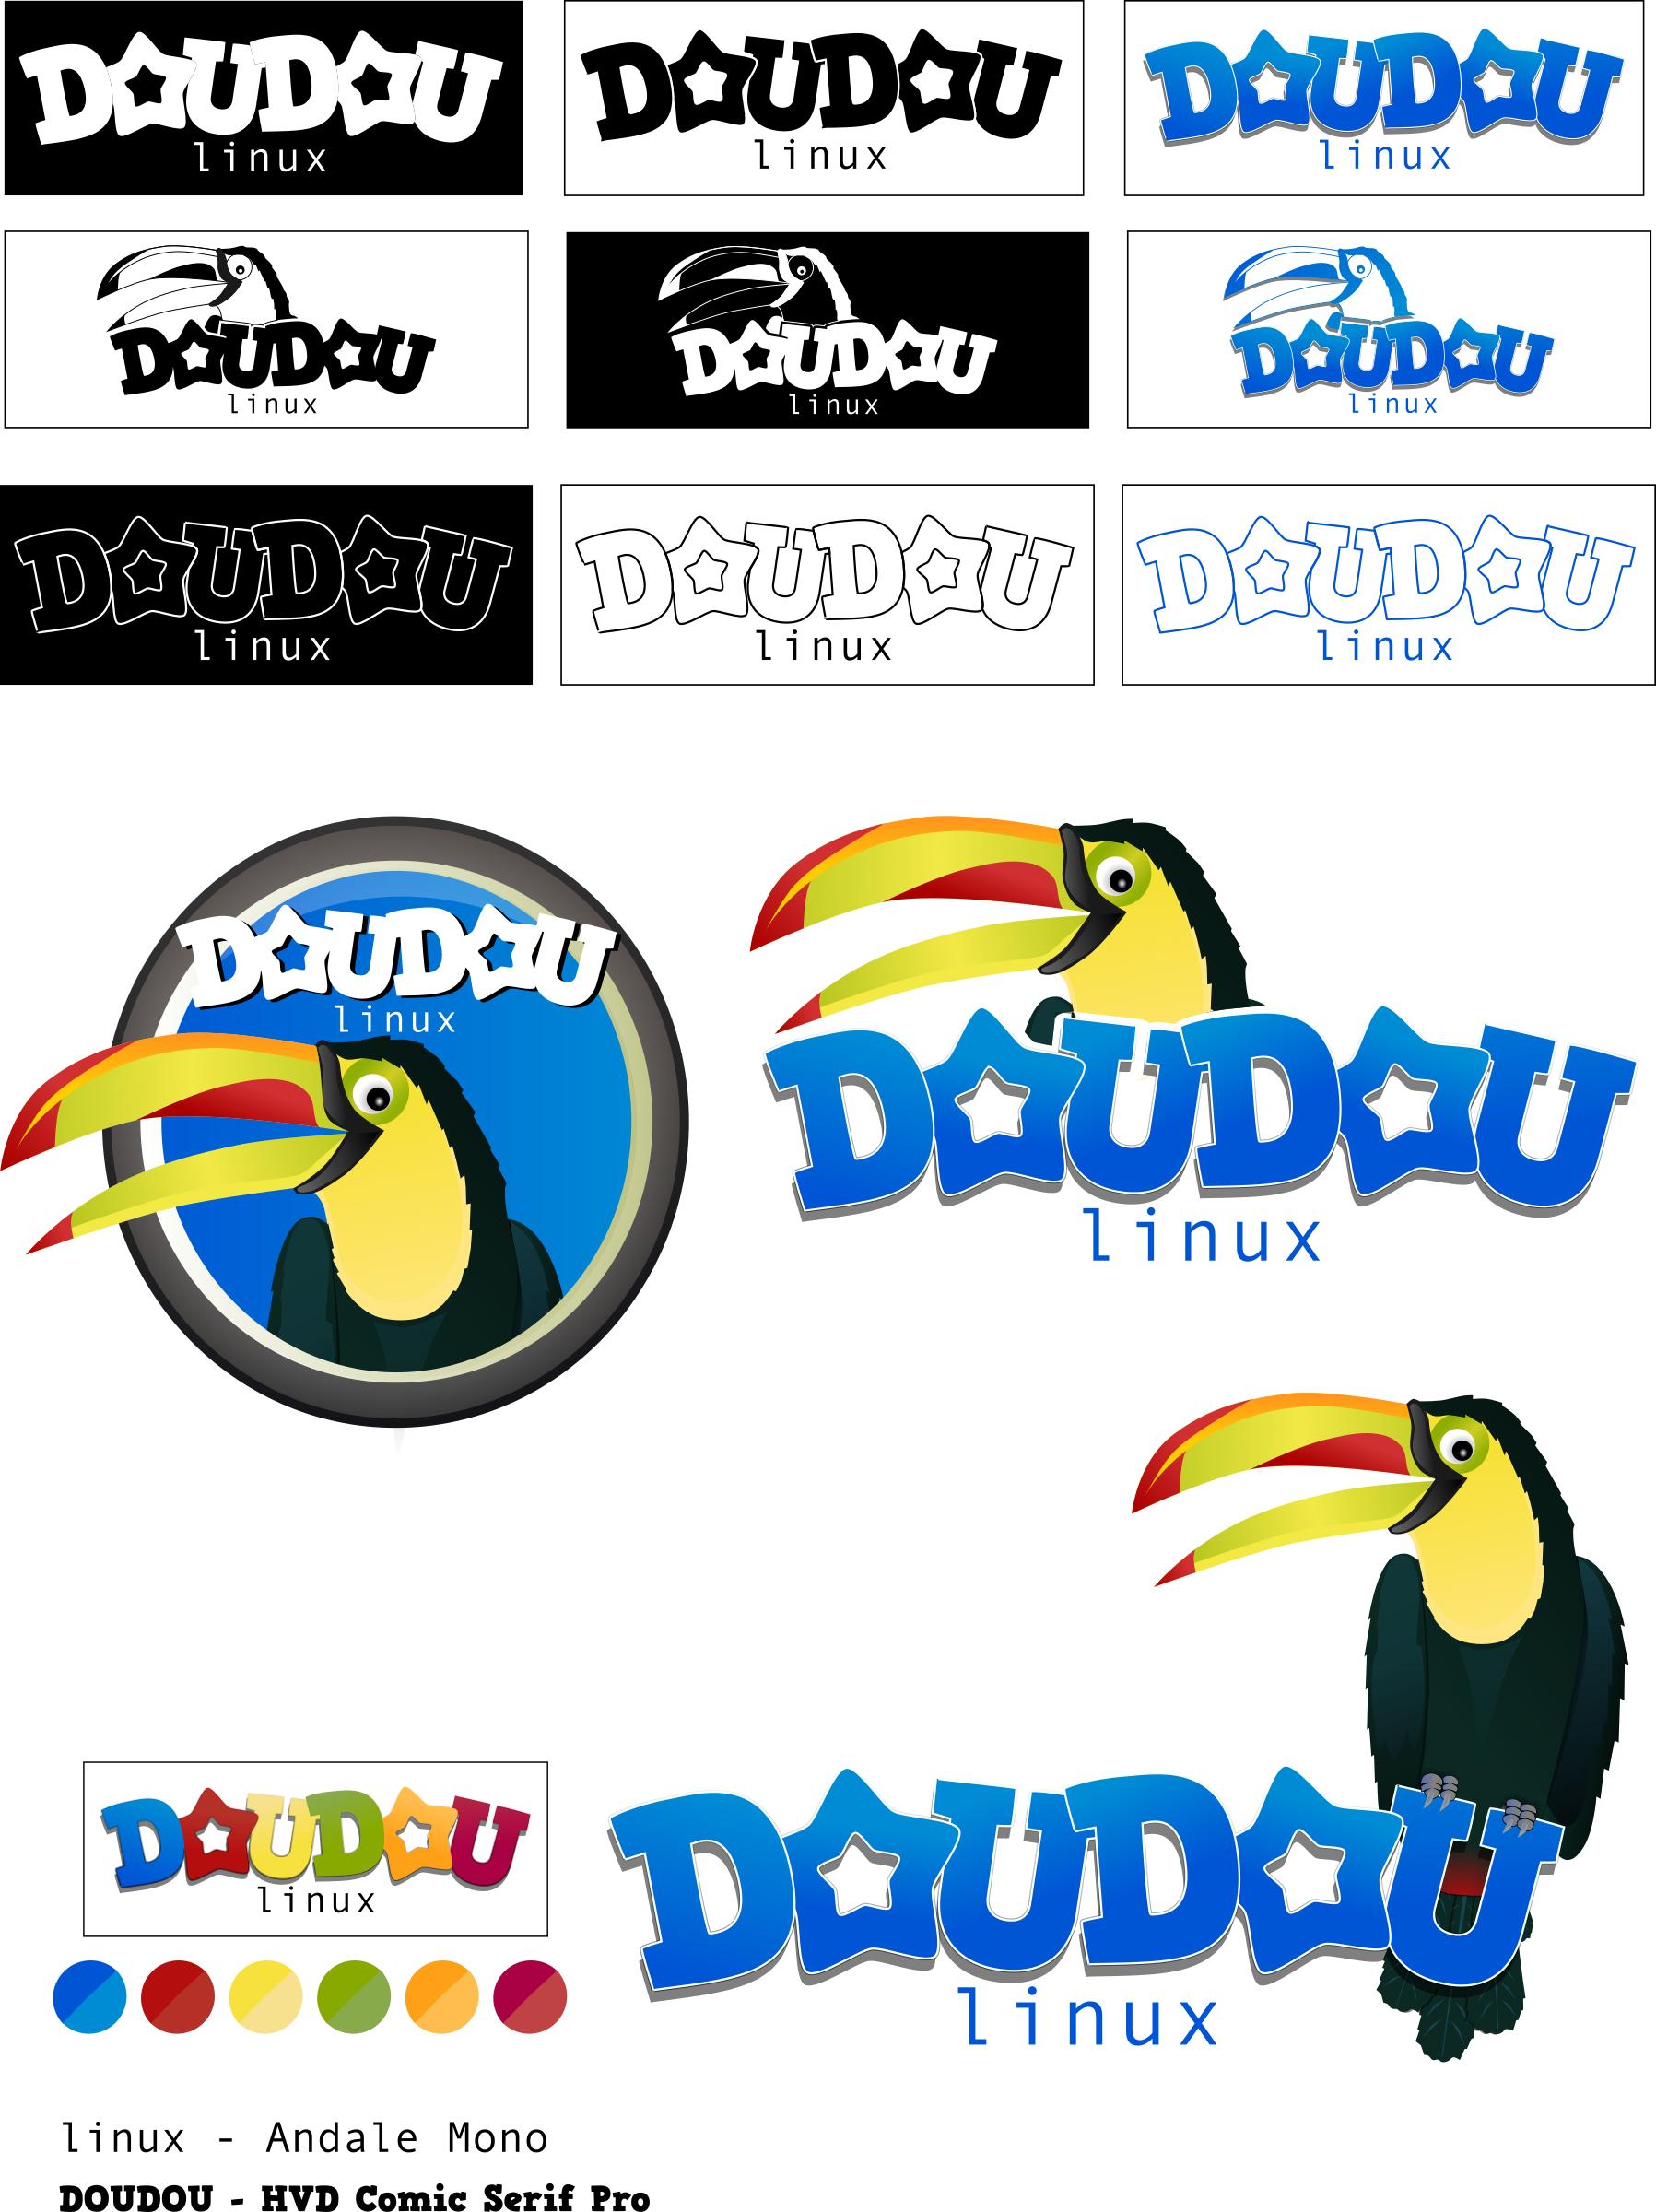 DouDou linux - Mascot and Logo Contest png